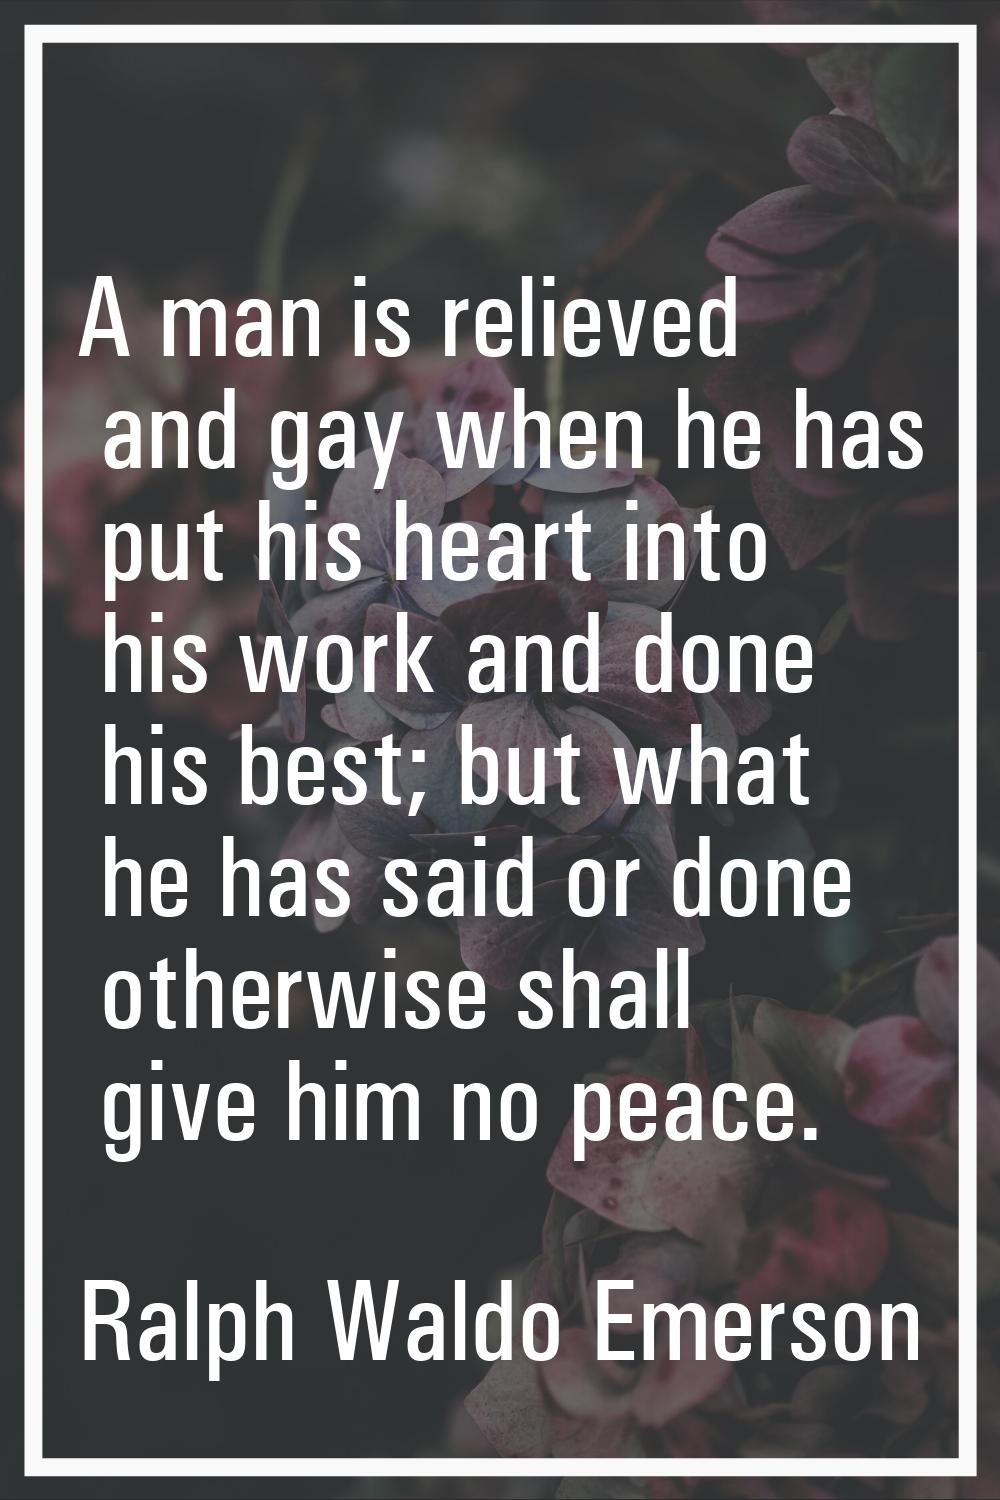 A man is relieved and gay when he has put his heart into his work and done his best; but what he ha